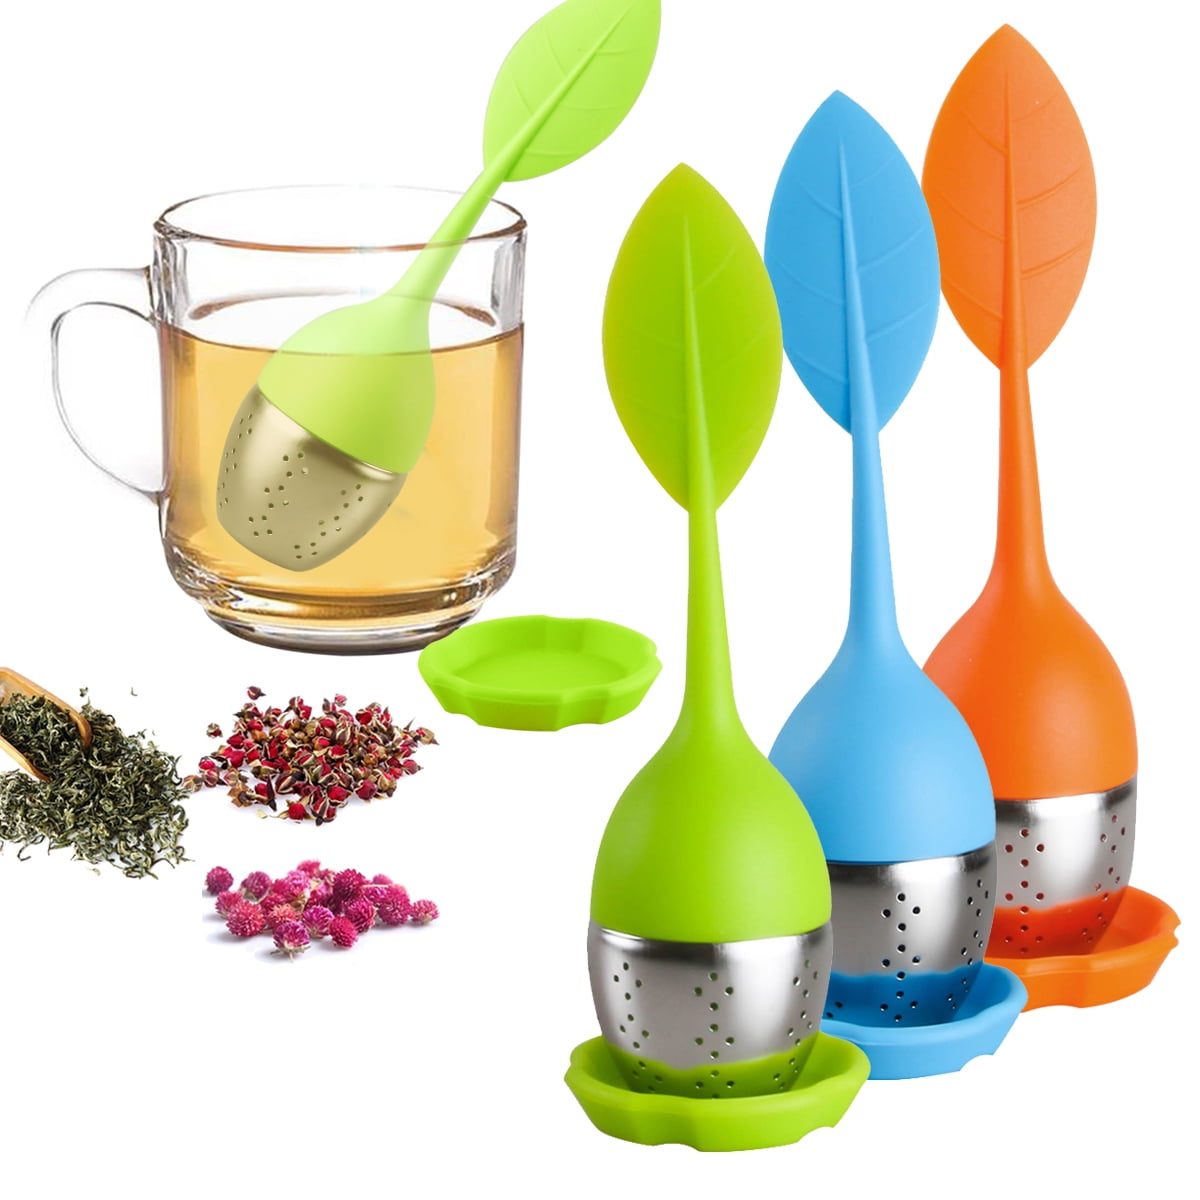 Morgane Strawberry Shape Tea Infuser Pure Soft Silicone Rubber Loose Tea Leaf Strainer Herbal Spice Filter Diffuser Kitchen Gadget Red+Green